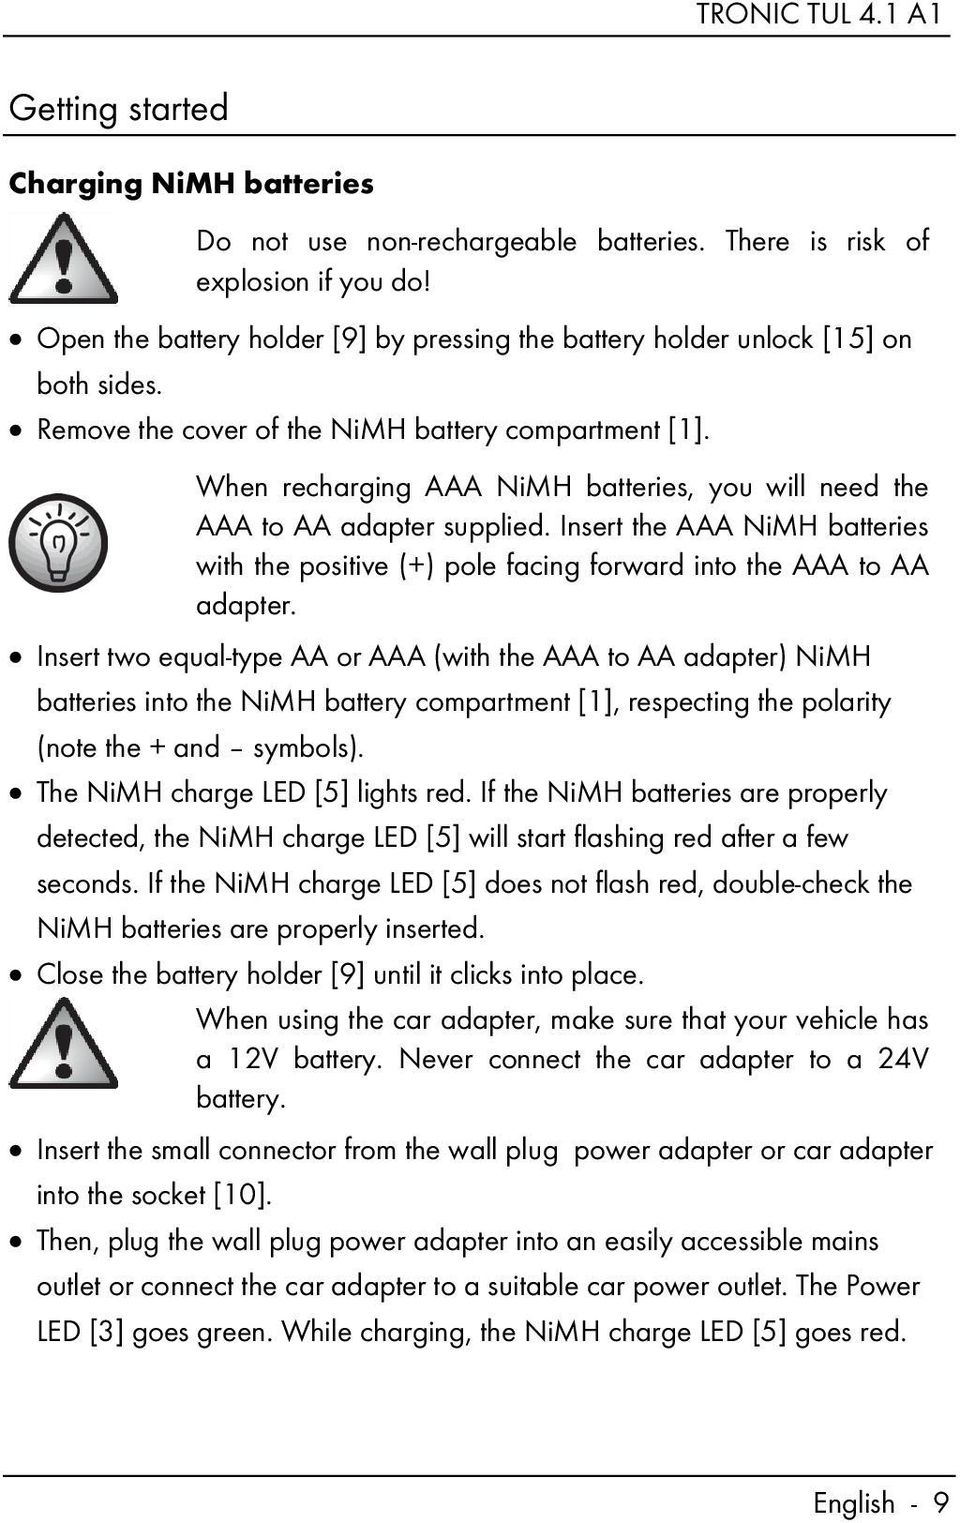 When recharging AAA NiMH batteries, you will need the AAA to AA adapter supplied. Insert the AAA NiMH batteries with the positive (+) pole facing forward into the AAA to AA adapter.